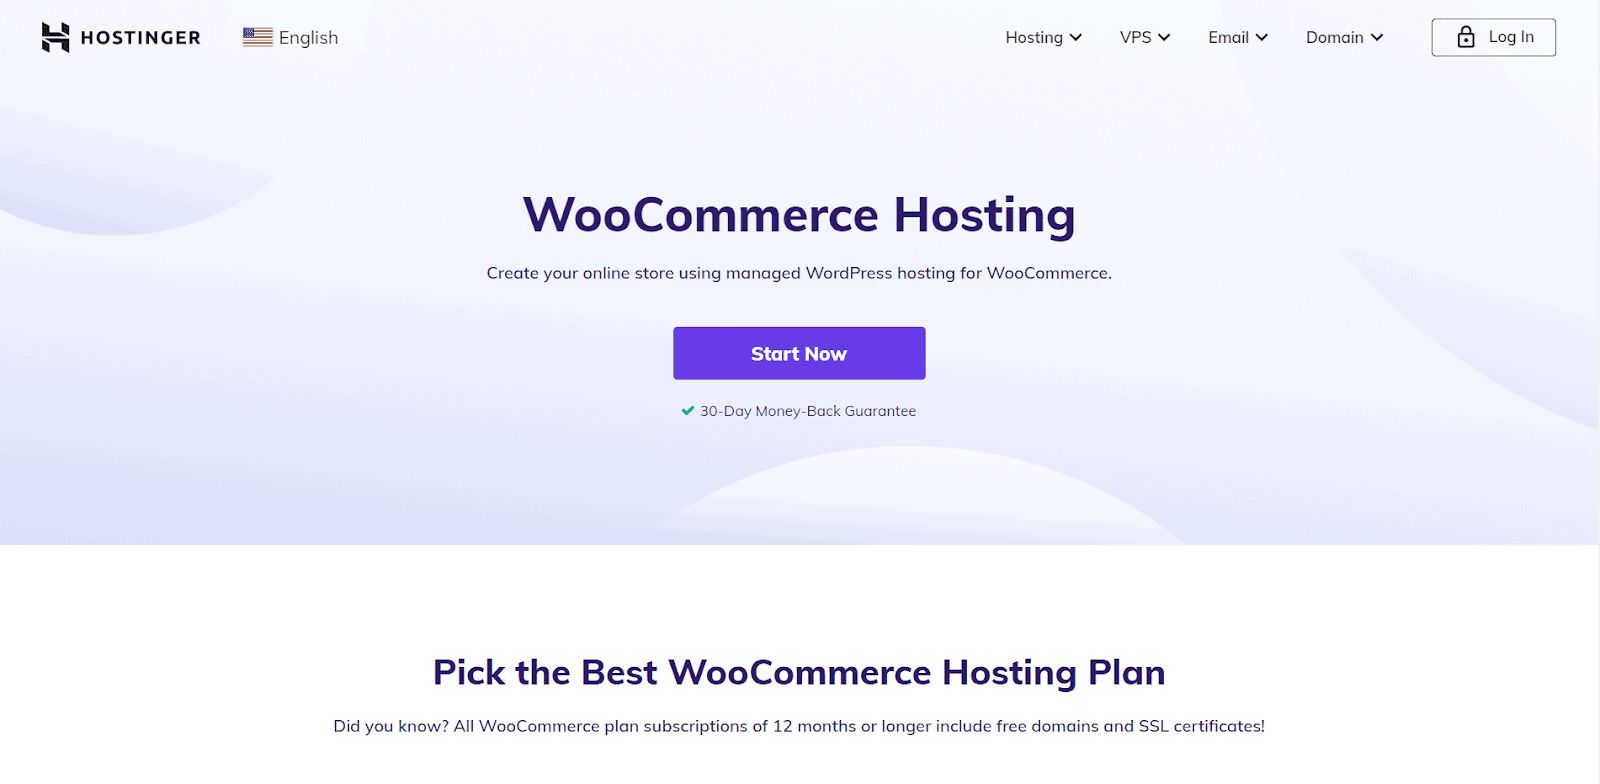 Hostinger’s plans come loaded with features, earning it a spot on our list of the best WooCommerce hosting providers.